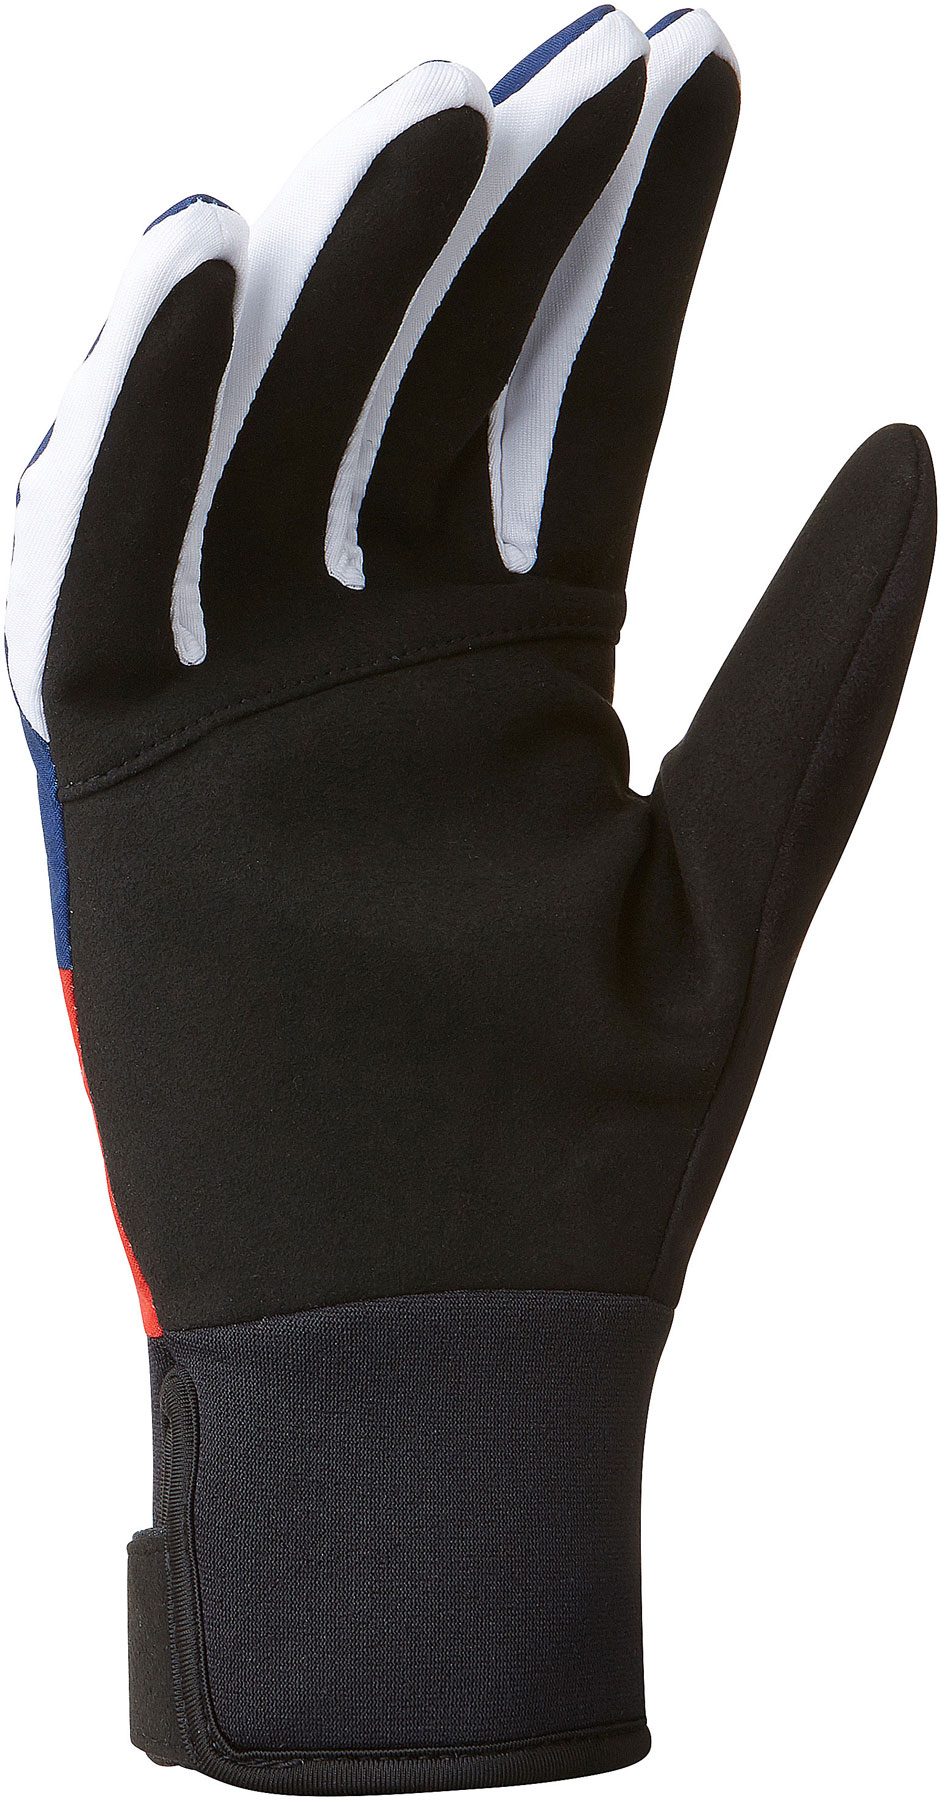 Gloves for cross-country skiing